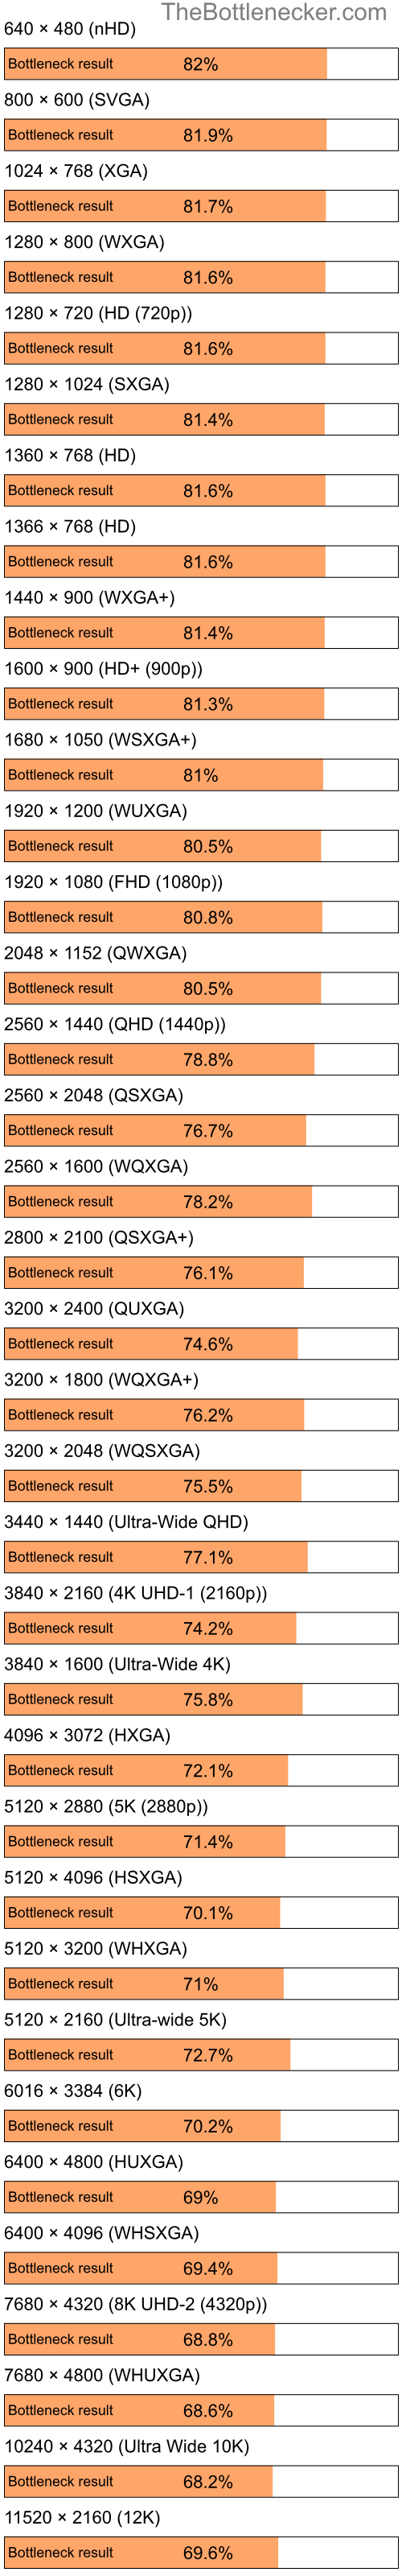 Bottleneck results by resolution for AMD Athlon XP 2000+ and NVIDIA GeForce RTX 3060 in Graphic Card Intense Tasks